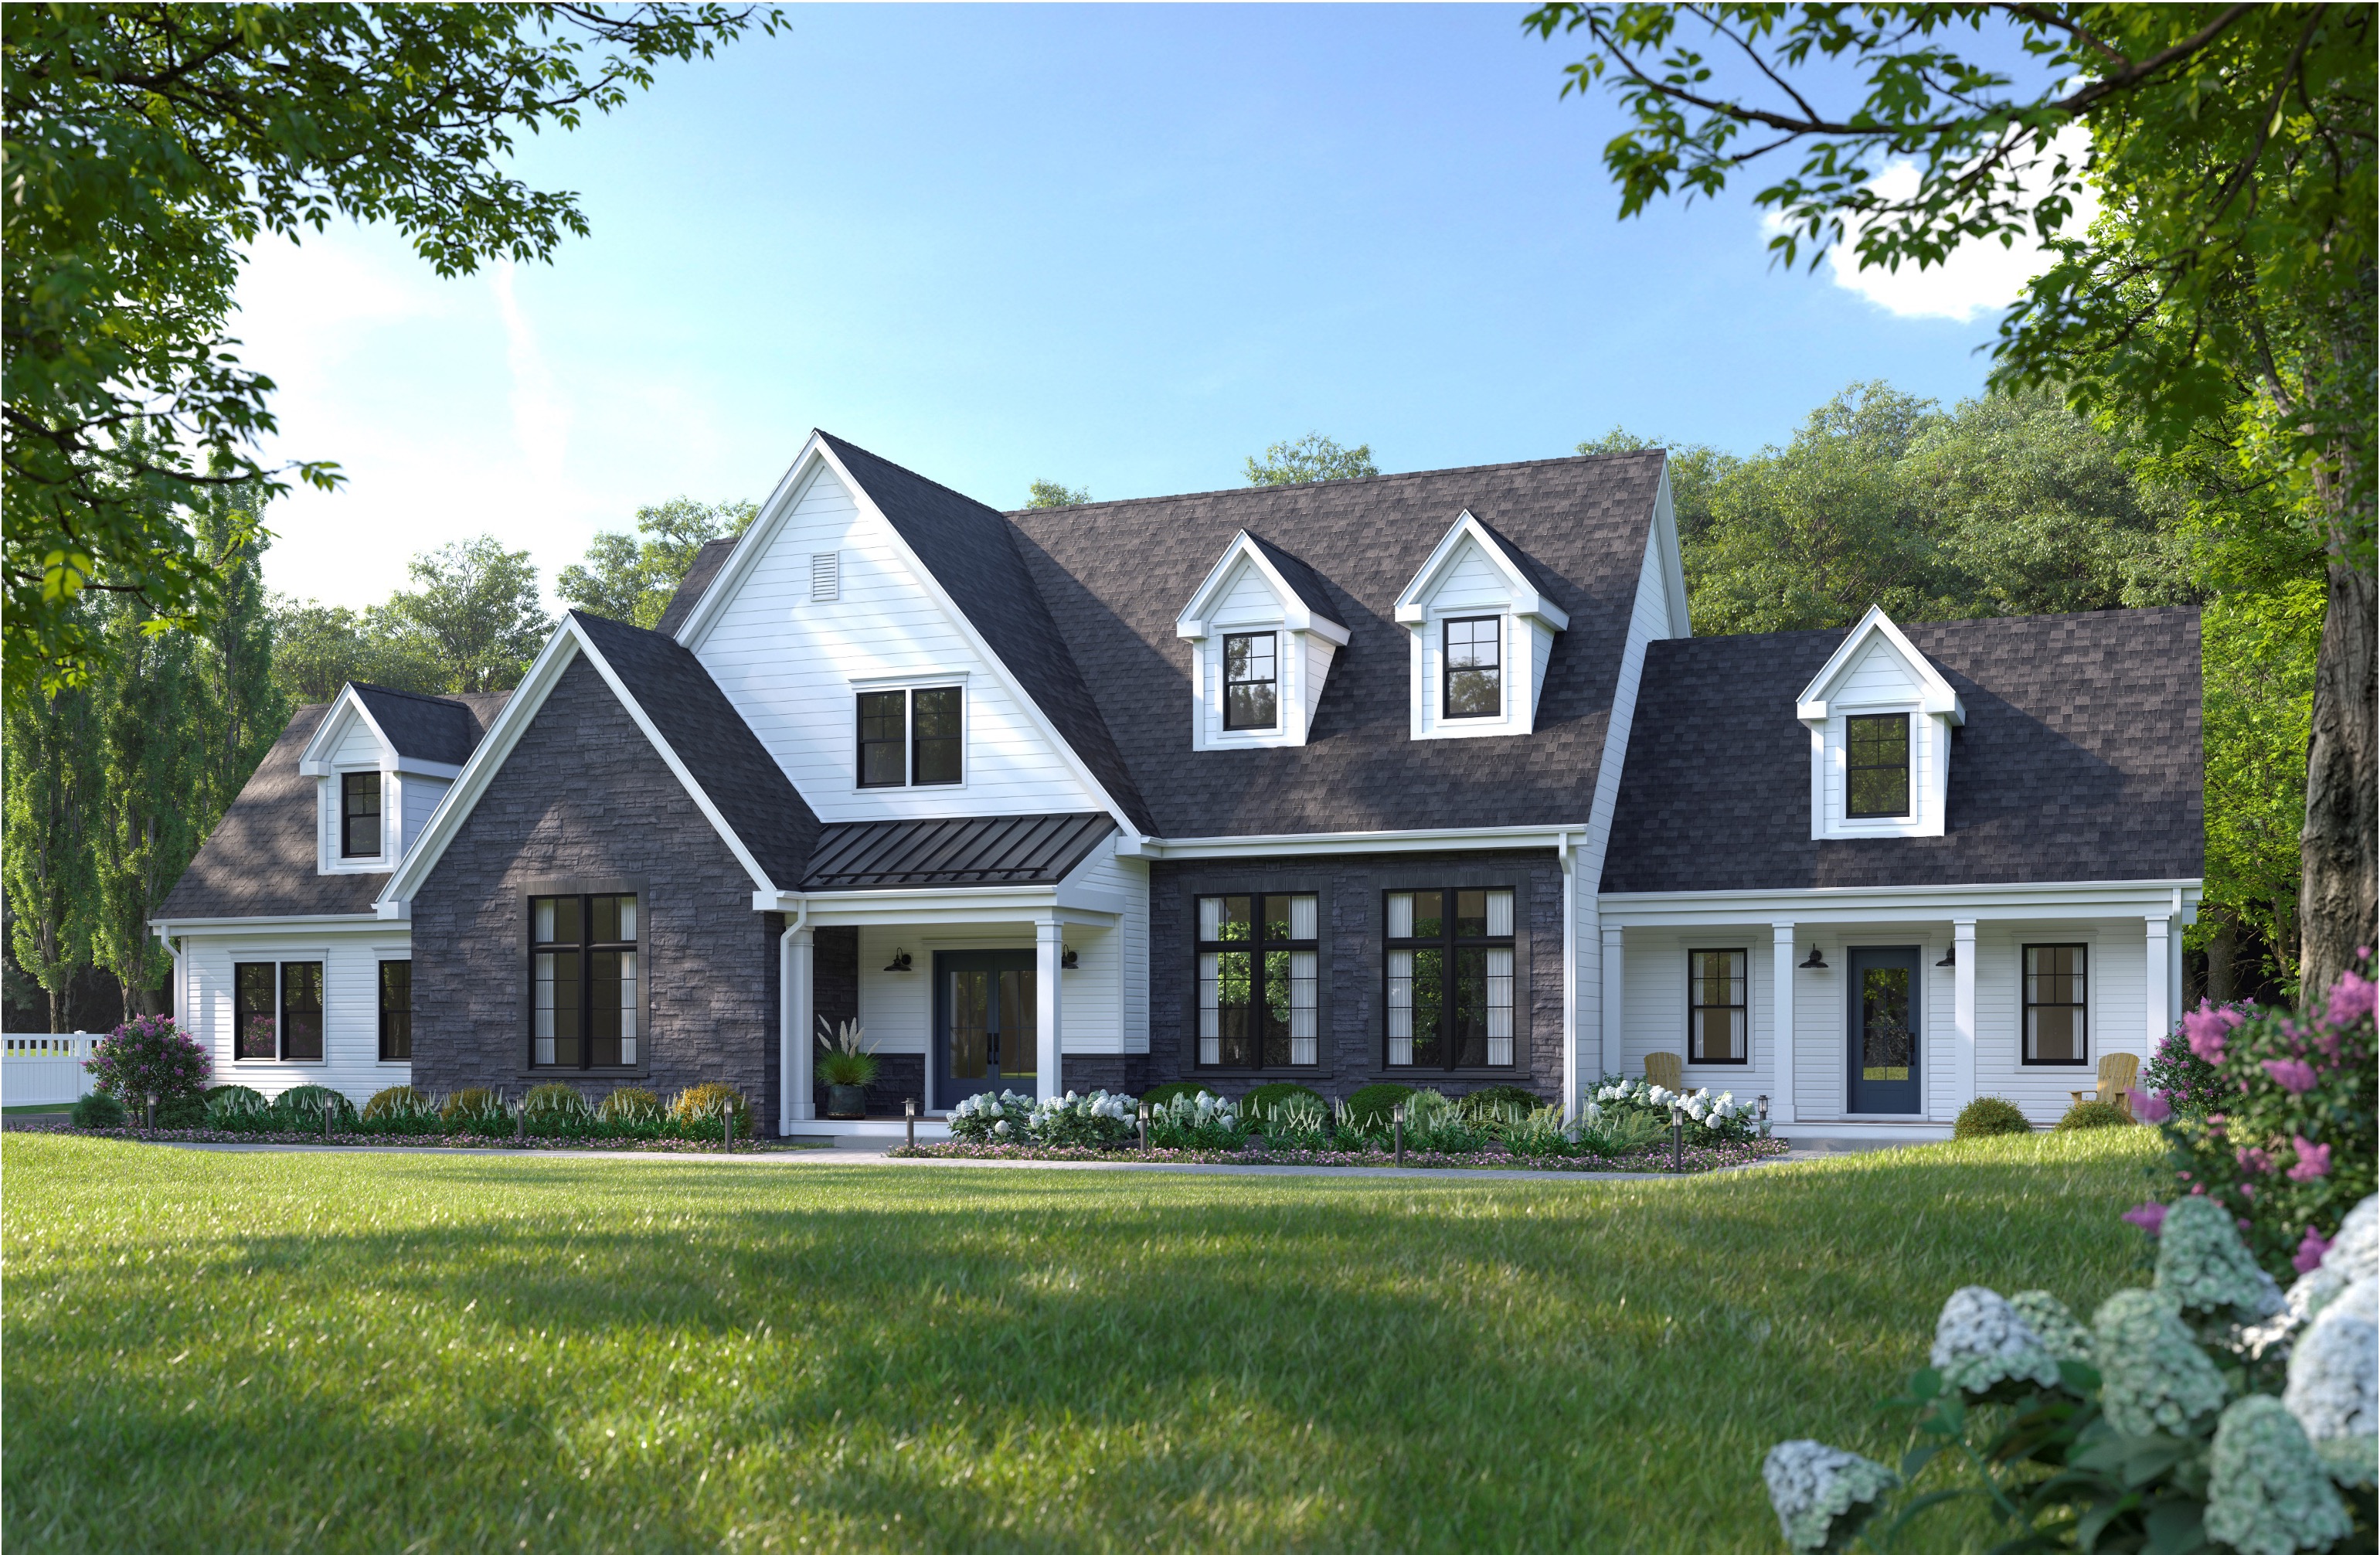 Rendering featuring Versetta Stone panelized stone siding (Tight-Cut profile in Northern Ash) and TruExterior poly-ash siding